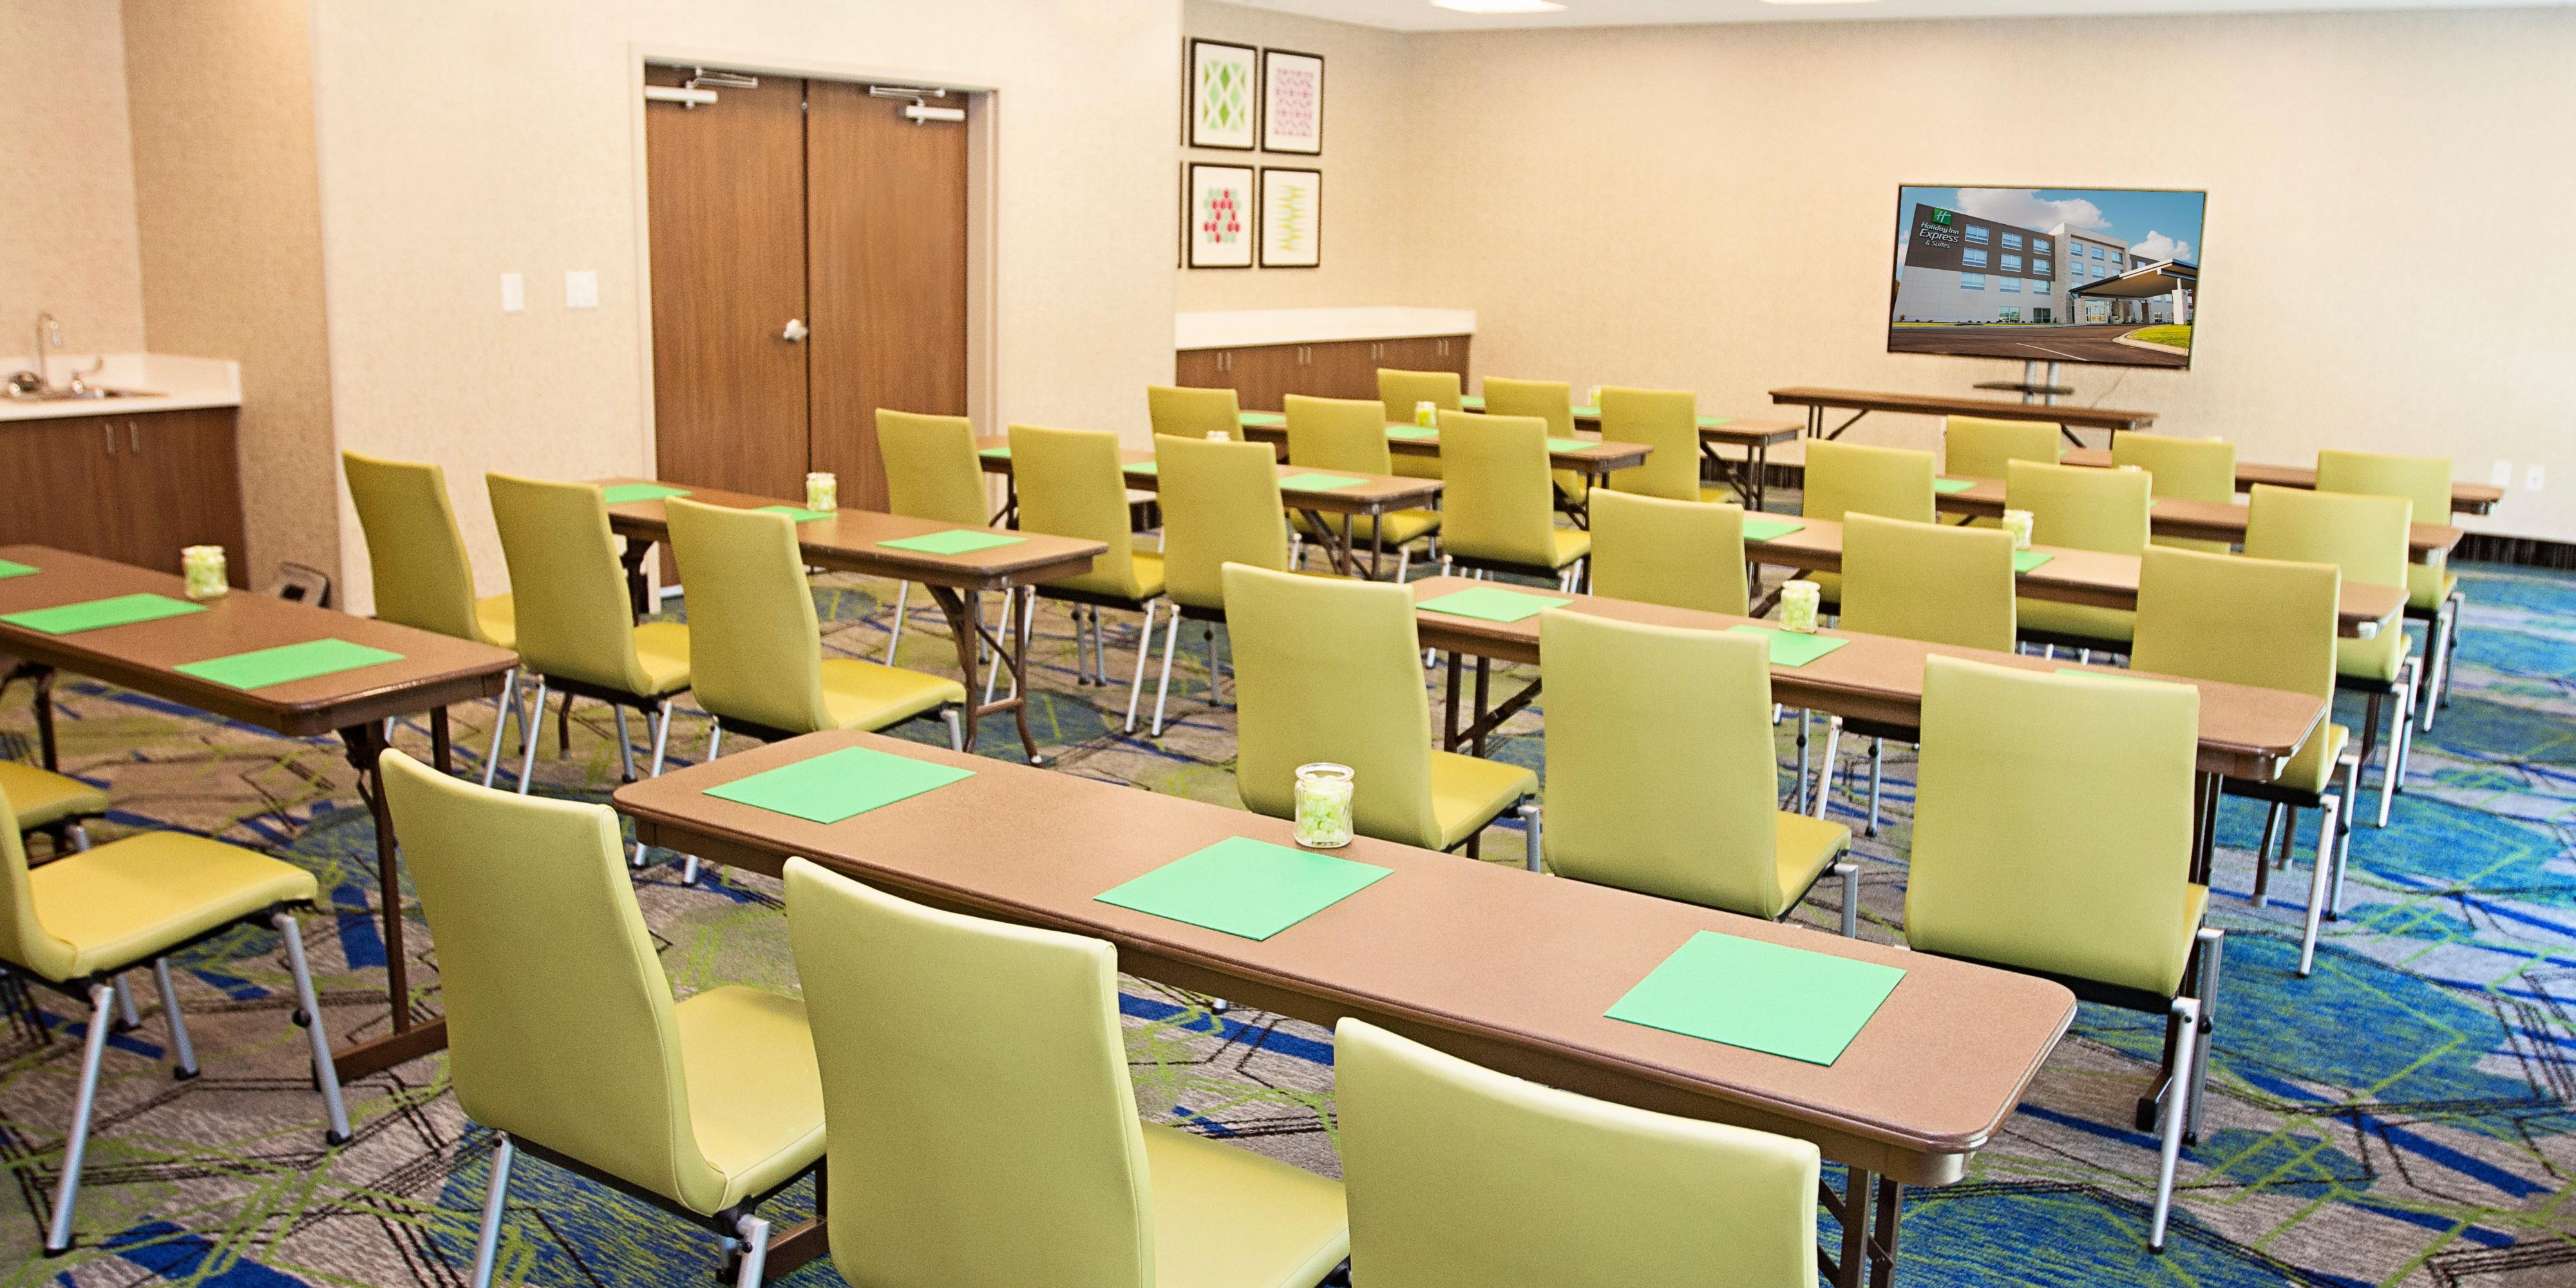 We would love to host your events and meetings. Our meeting room is 800 Square Feet and we can accommodate any style of meeting. Catering options are available. Please visit our website or give us a call. We can also accommodate wedding & family reunions for group room blocks.